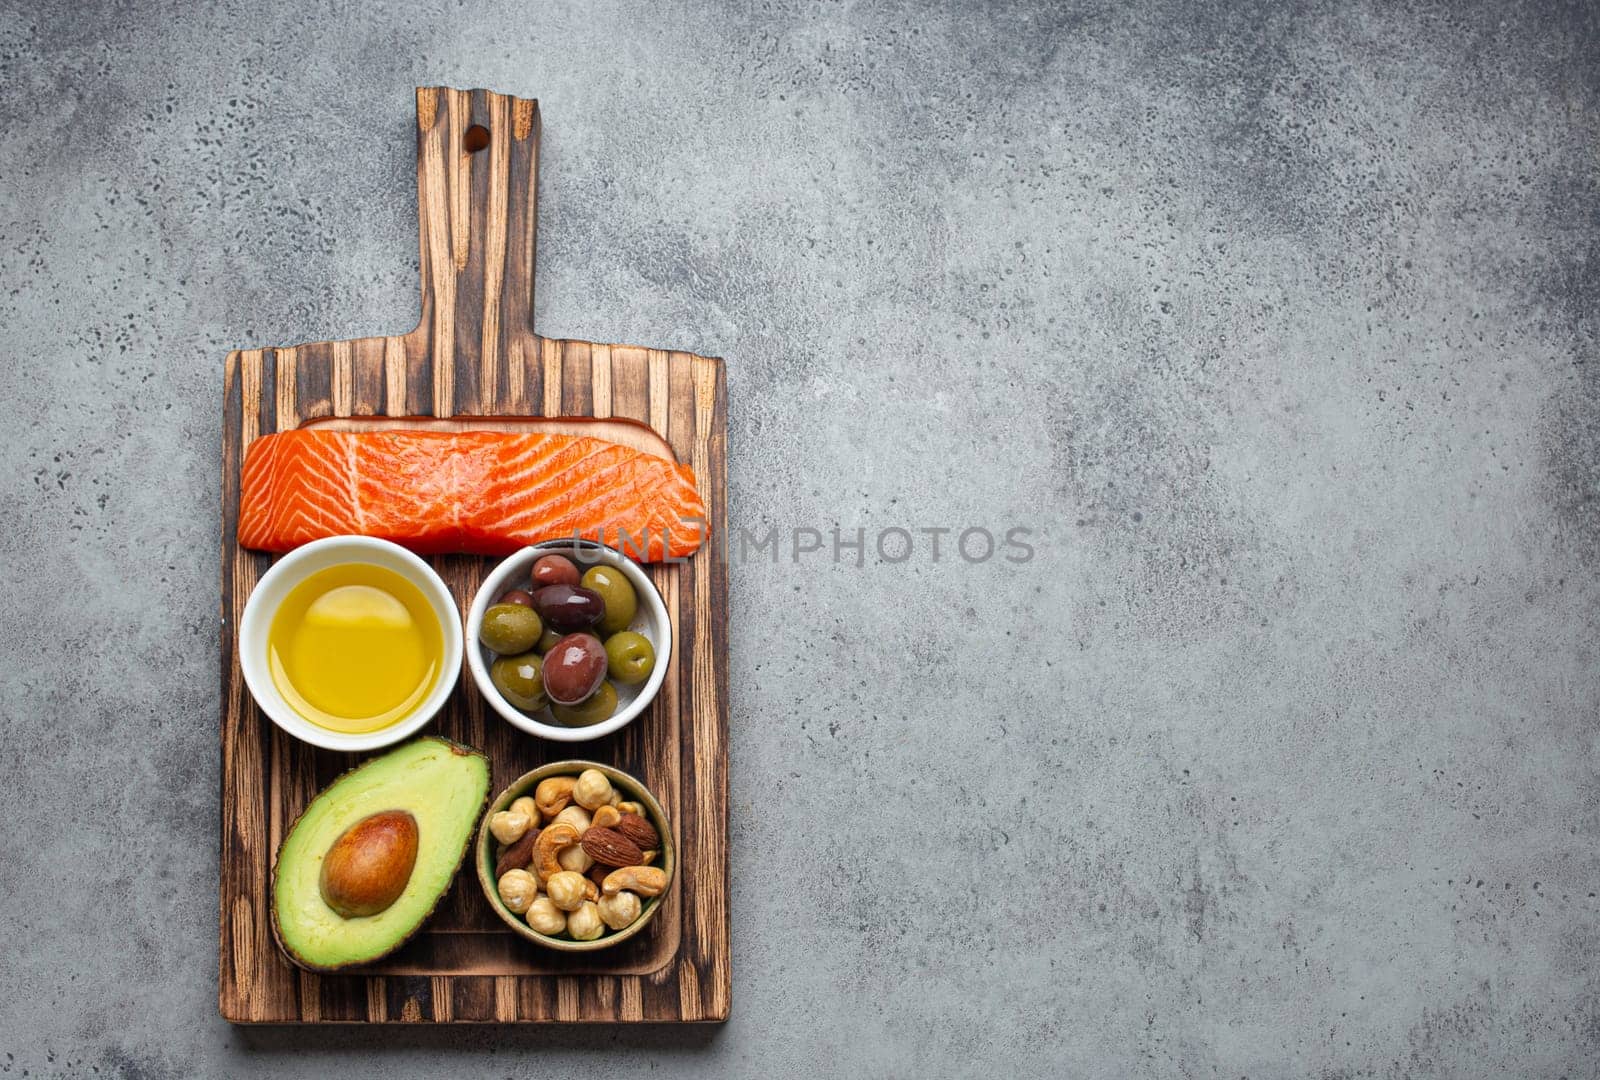 Food sources of healthy unsaturated fat and omega 3: fresh raw salmon fillet, avocado, olives, nuts on cutting board, rustic stone background top view. Healthy nutrition and keto diet, space for text